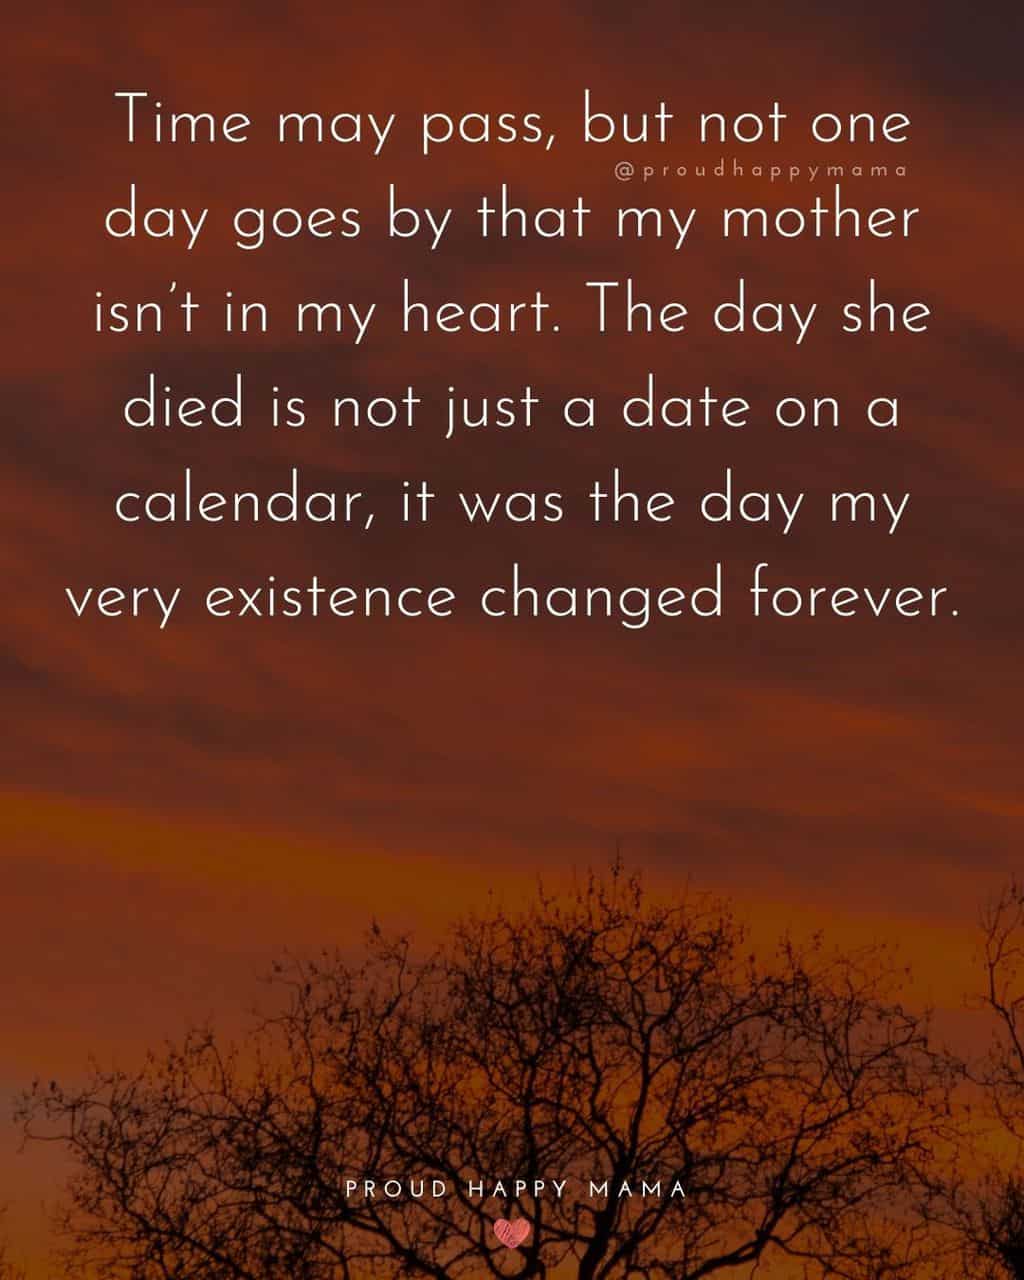 Orange skies with missing mom in heaven quote text overlay, ‘Time may pass, but not one day goes by that my mother isn’t in my heart. The day she died is not just a date on a calendar, it was the day my very existence changed forever.’